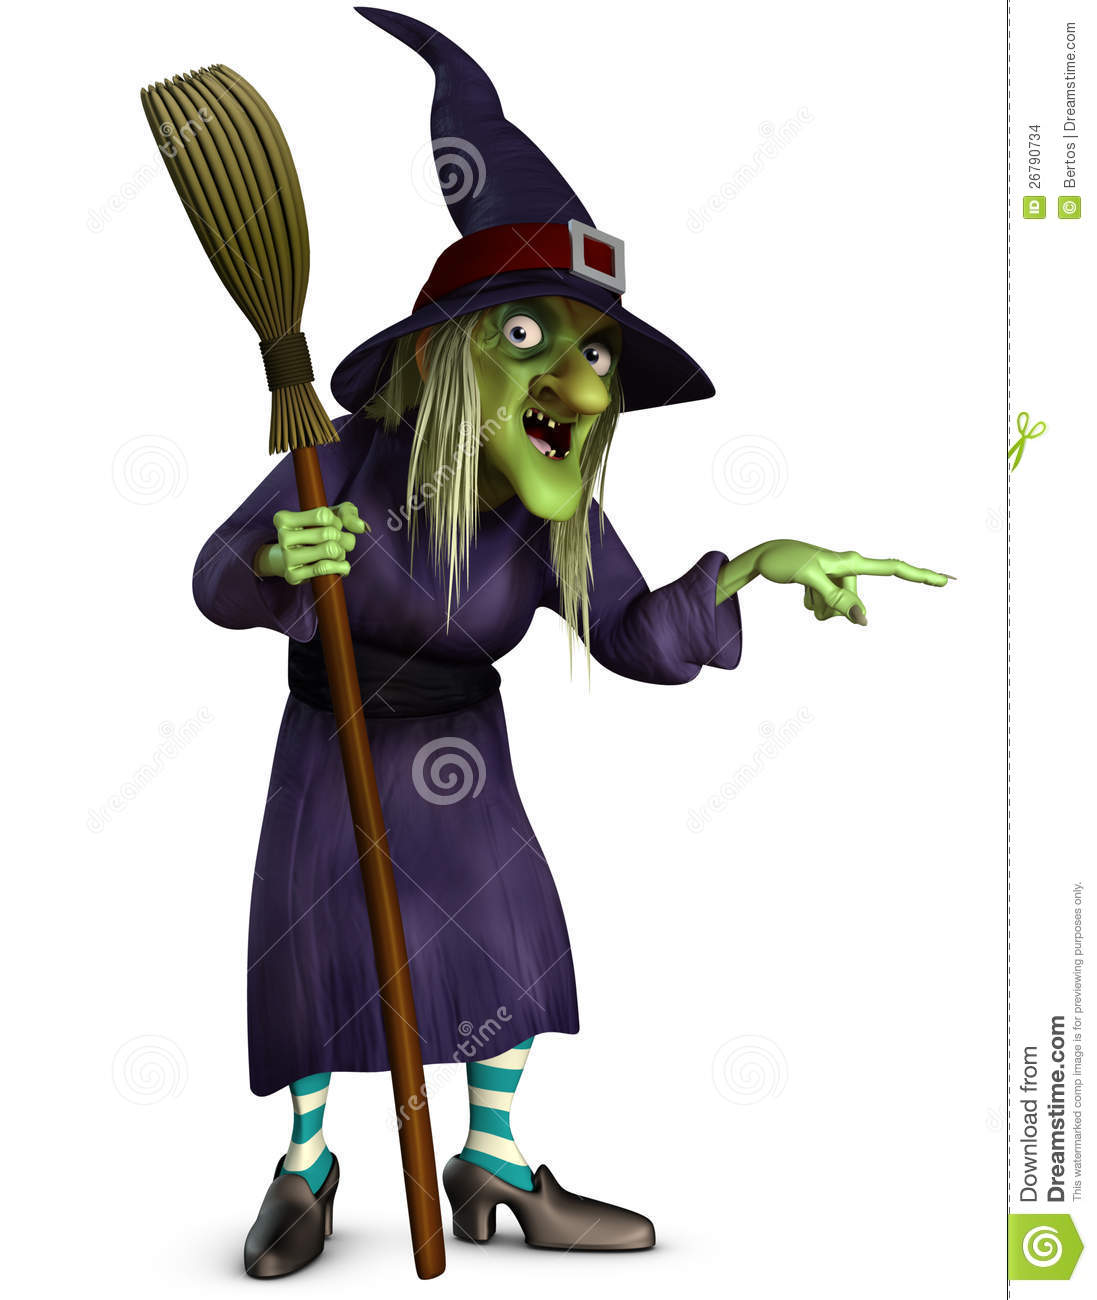 Witch With Broom Stock Images   Image  26790734